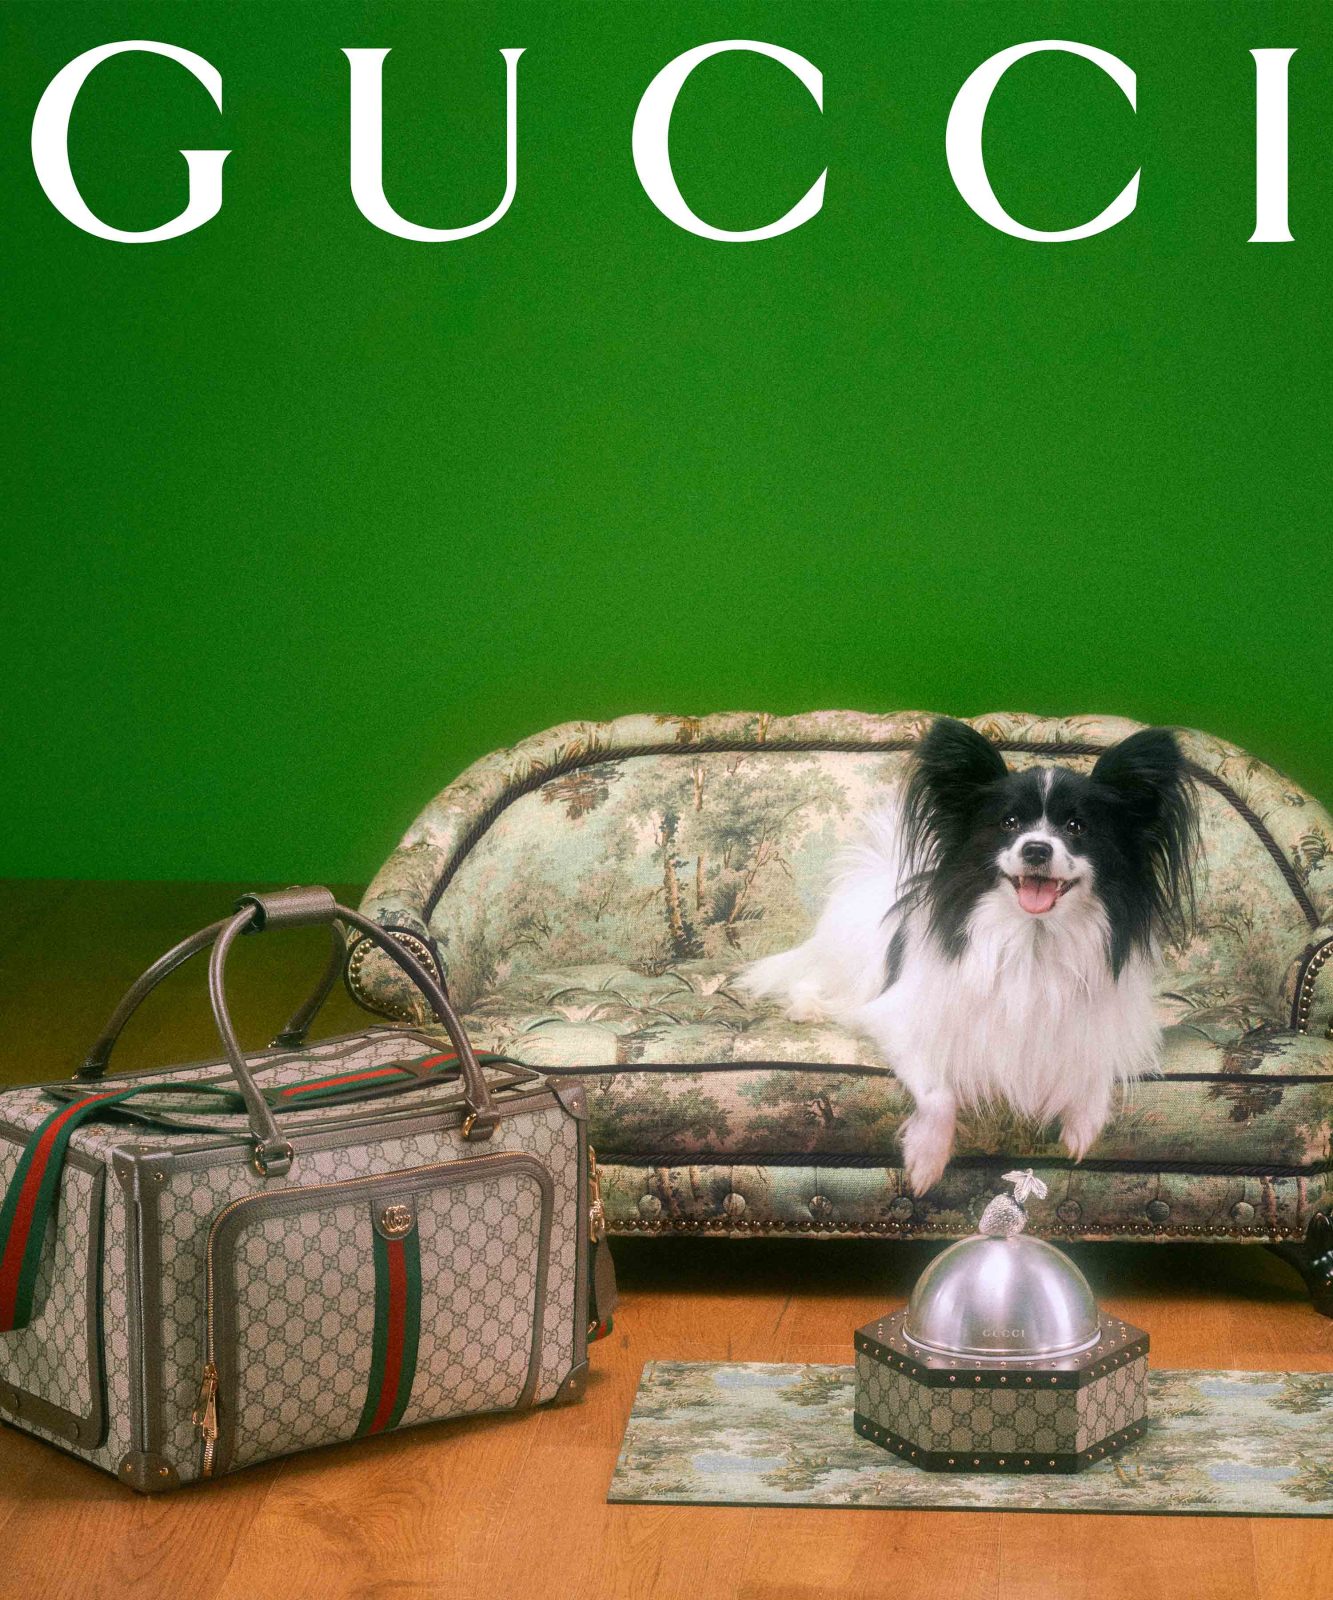 Where can I get the Gucci pet collection?